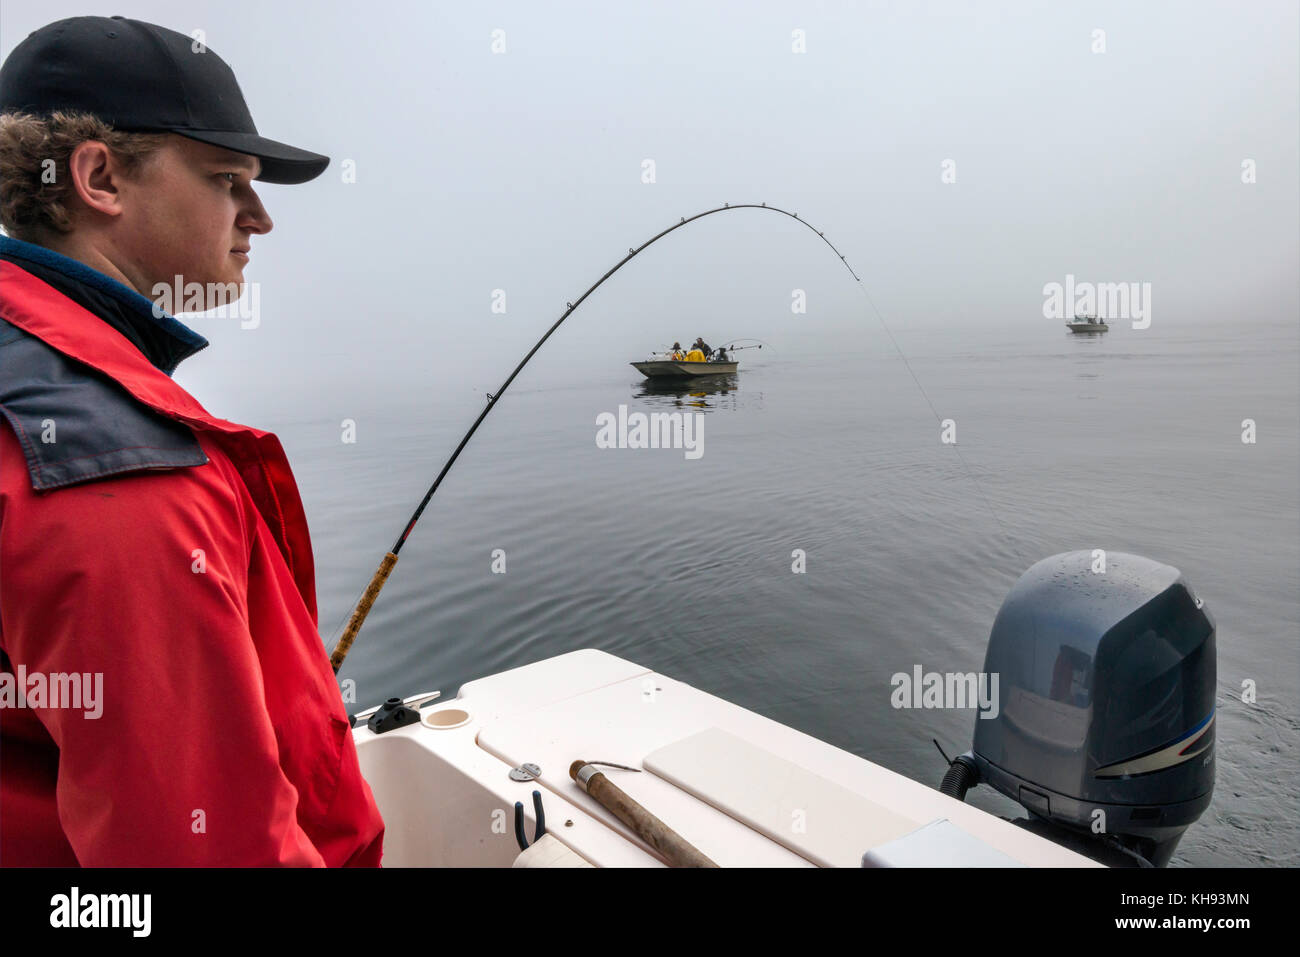 Young adult in red jacket with fishing rod on boat, passing other boats, foggy morning in Johnstone Strait off Vancouver Island, British Columbia, Can Stock Photo